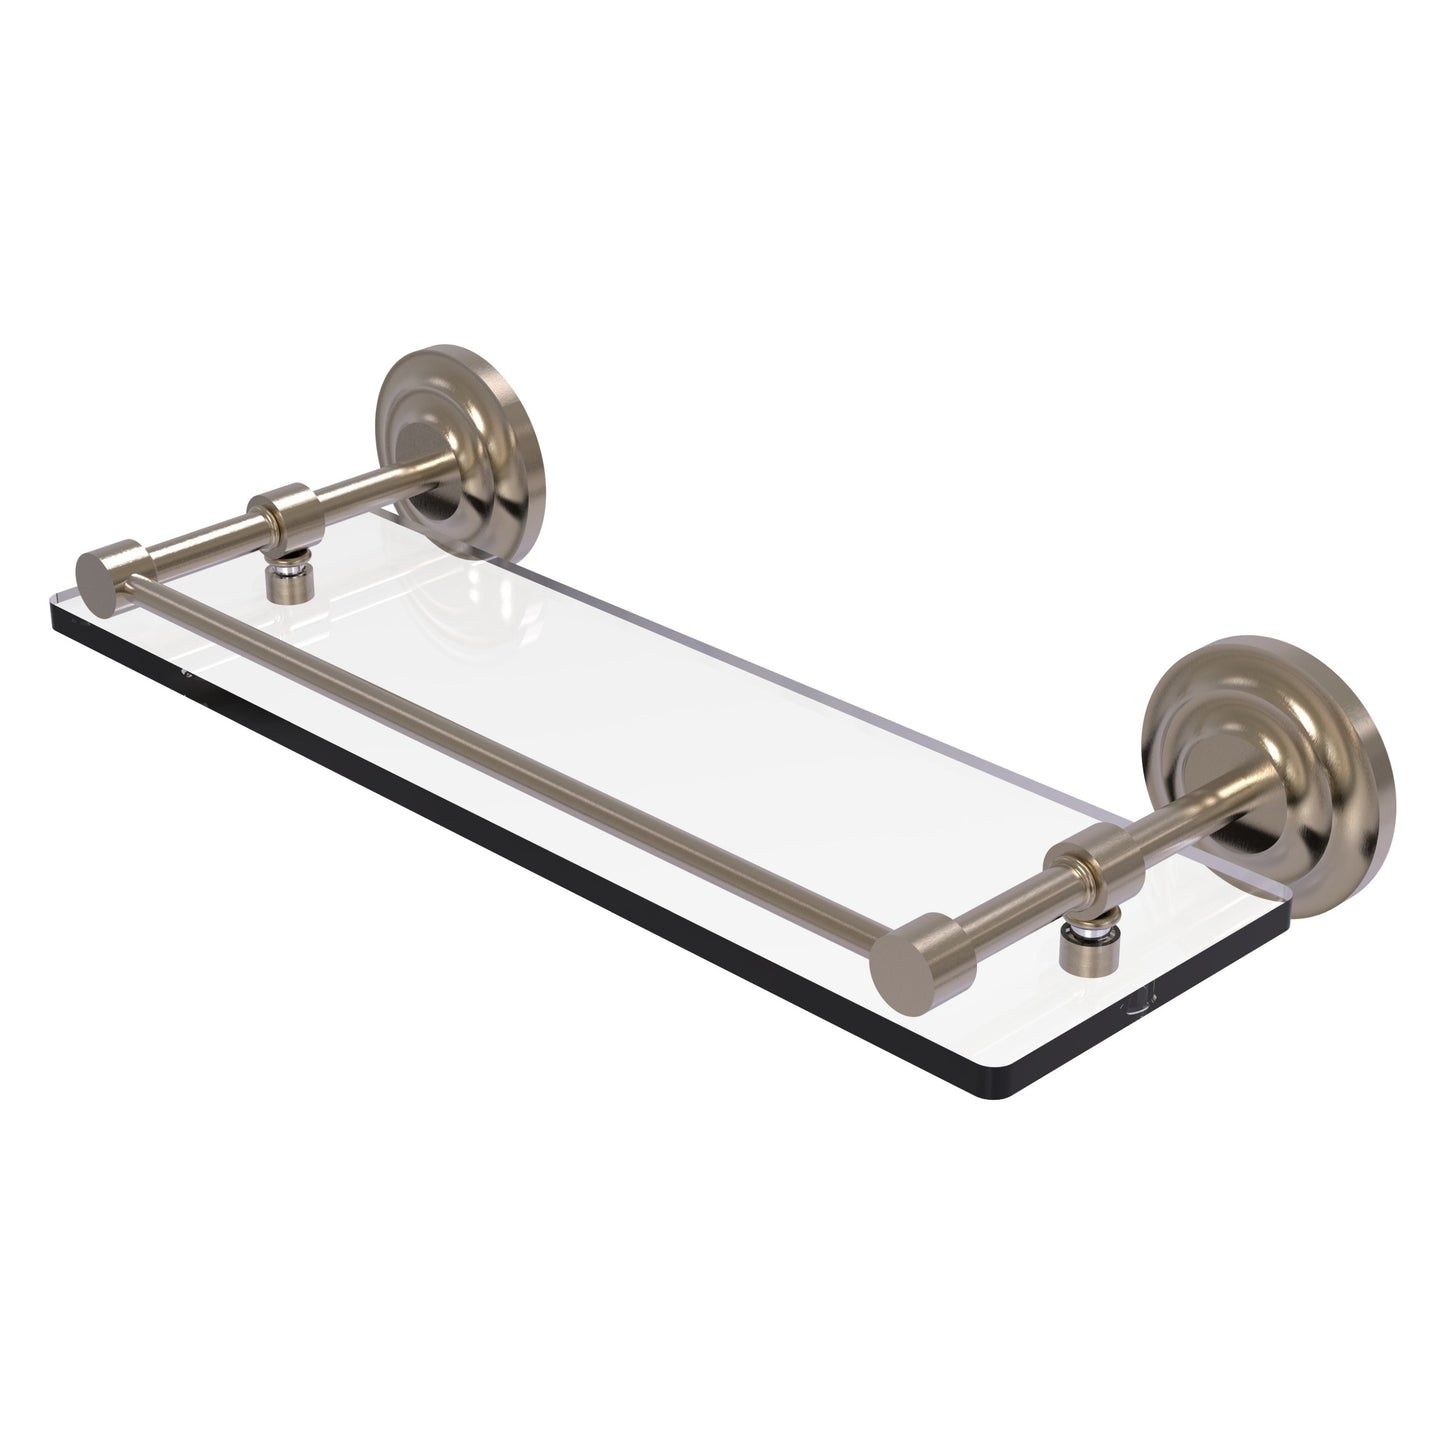 Allied Brass Que New 16" x 5" Antique Pewter Solid Brass 16-Inch Tempered Glass Shelf With Gallery Rail